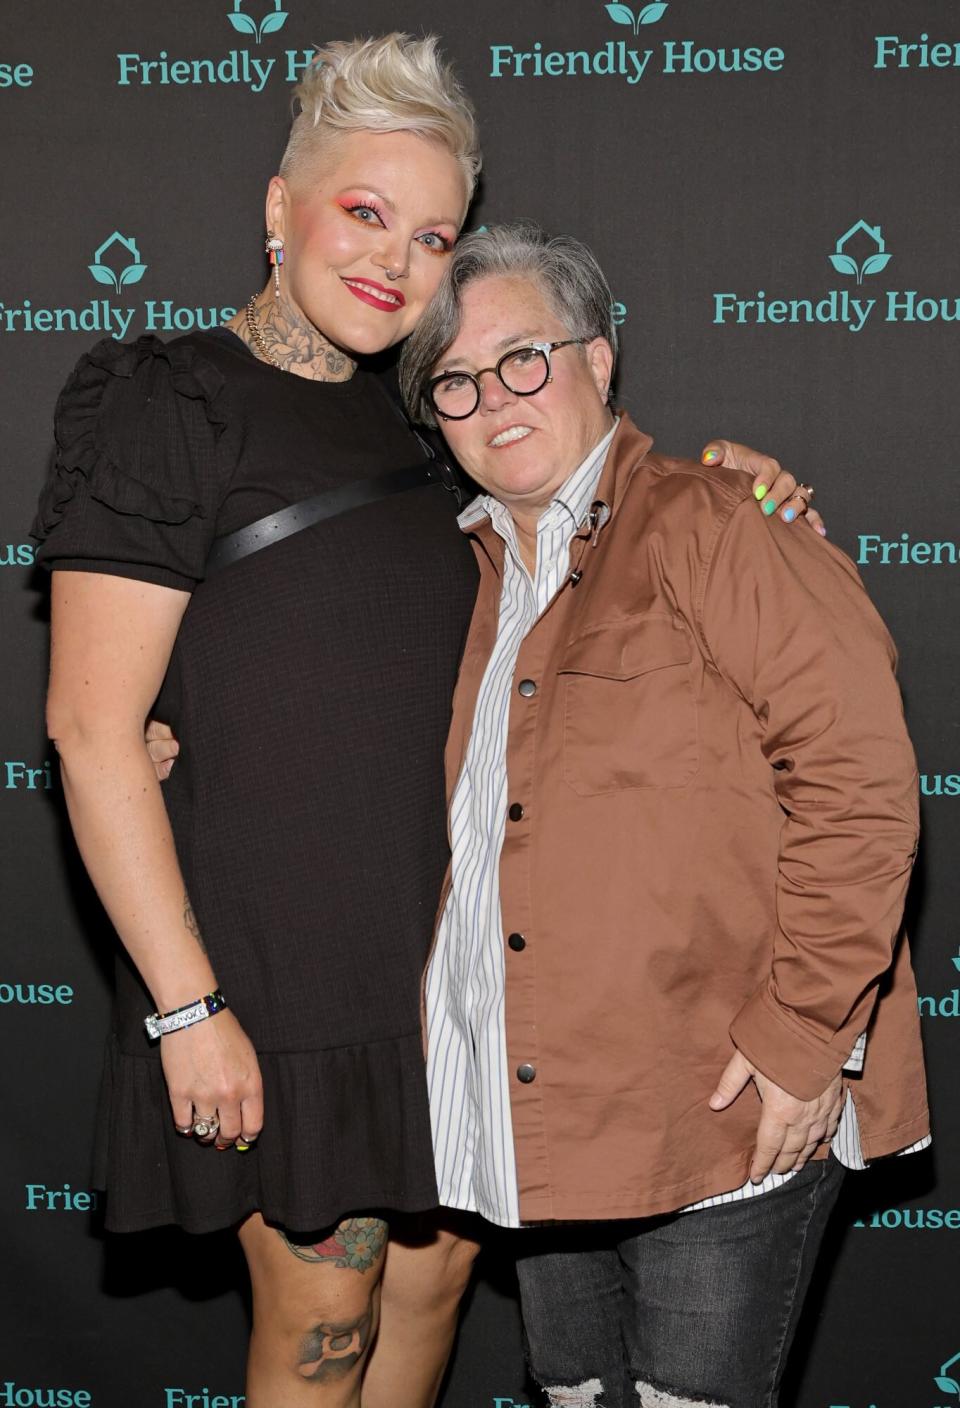 LOS ANGELES, CALIFORNIA - JULY 16: (L-R) Aimee Hauer and Rosie O'Donnell attend FRIENDLY HOUSE LA Comedy Benefit, hosted by Rosie O'Donnell, at The Fonda Theatre on July 16, 2022 in Los Angeles, California. (Photo by Amy Sussman/Getty Images)